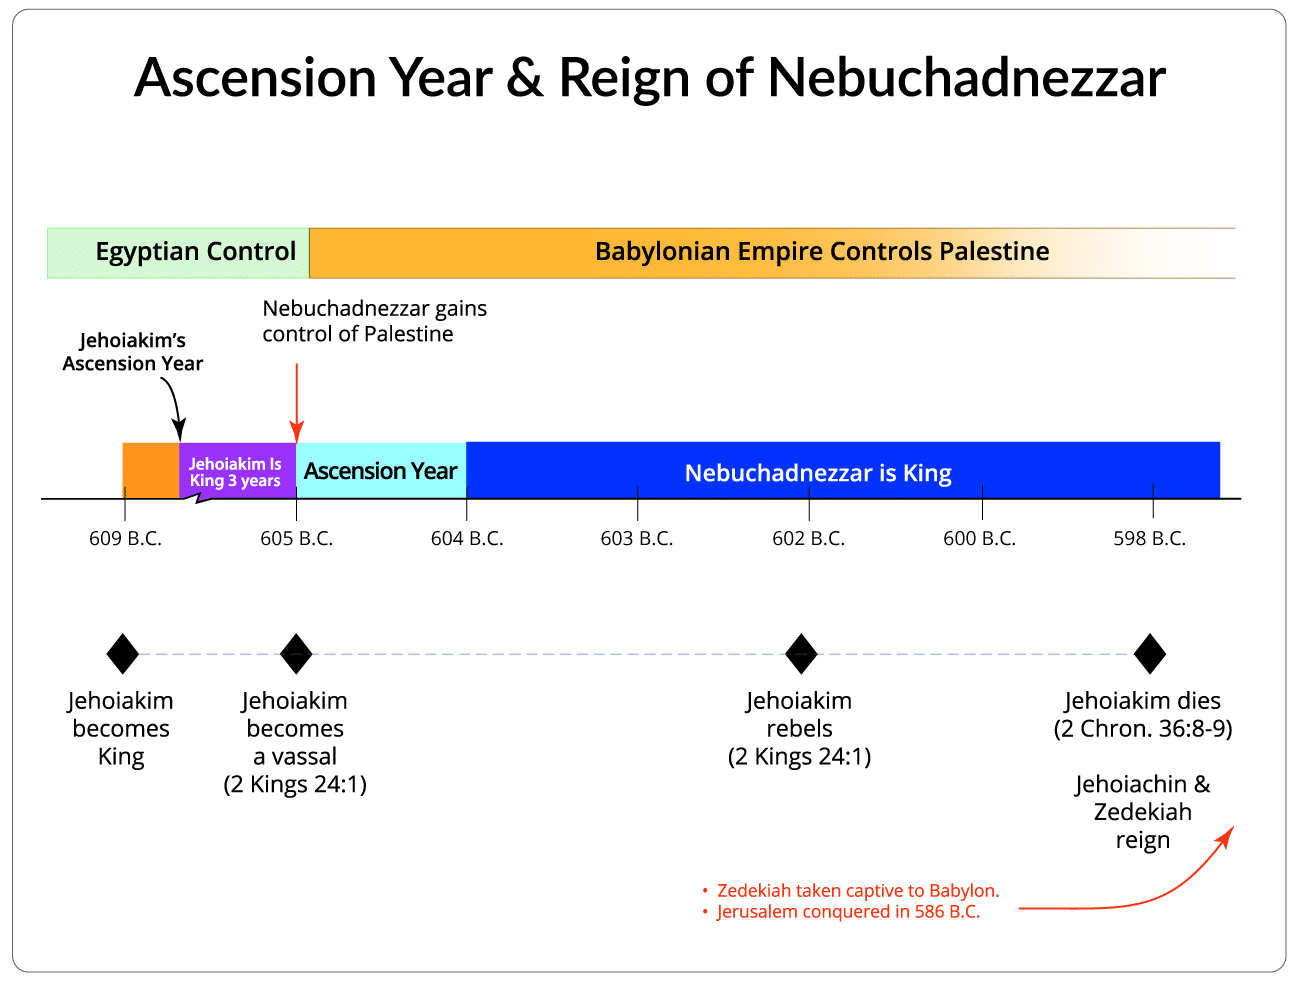 Ascension Year & Reign of Nebucahnezzar